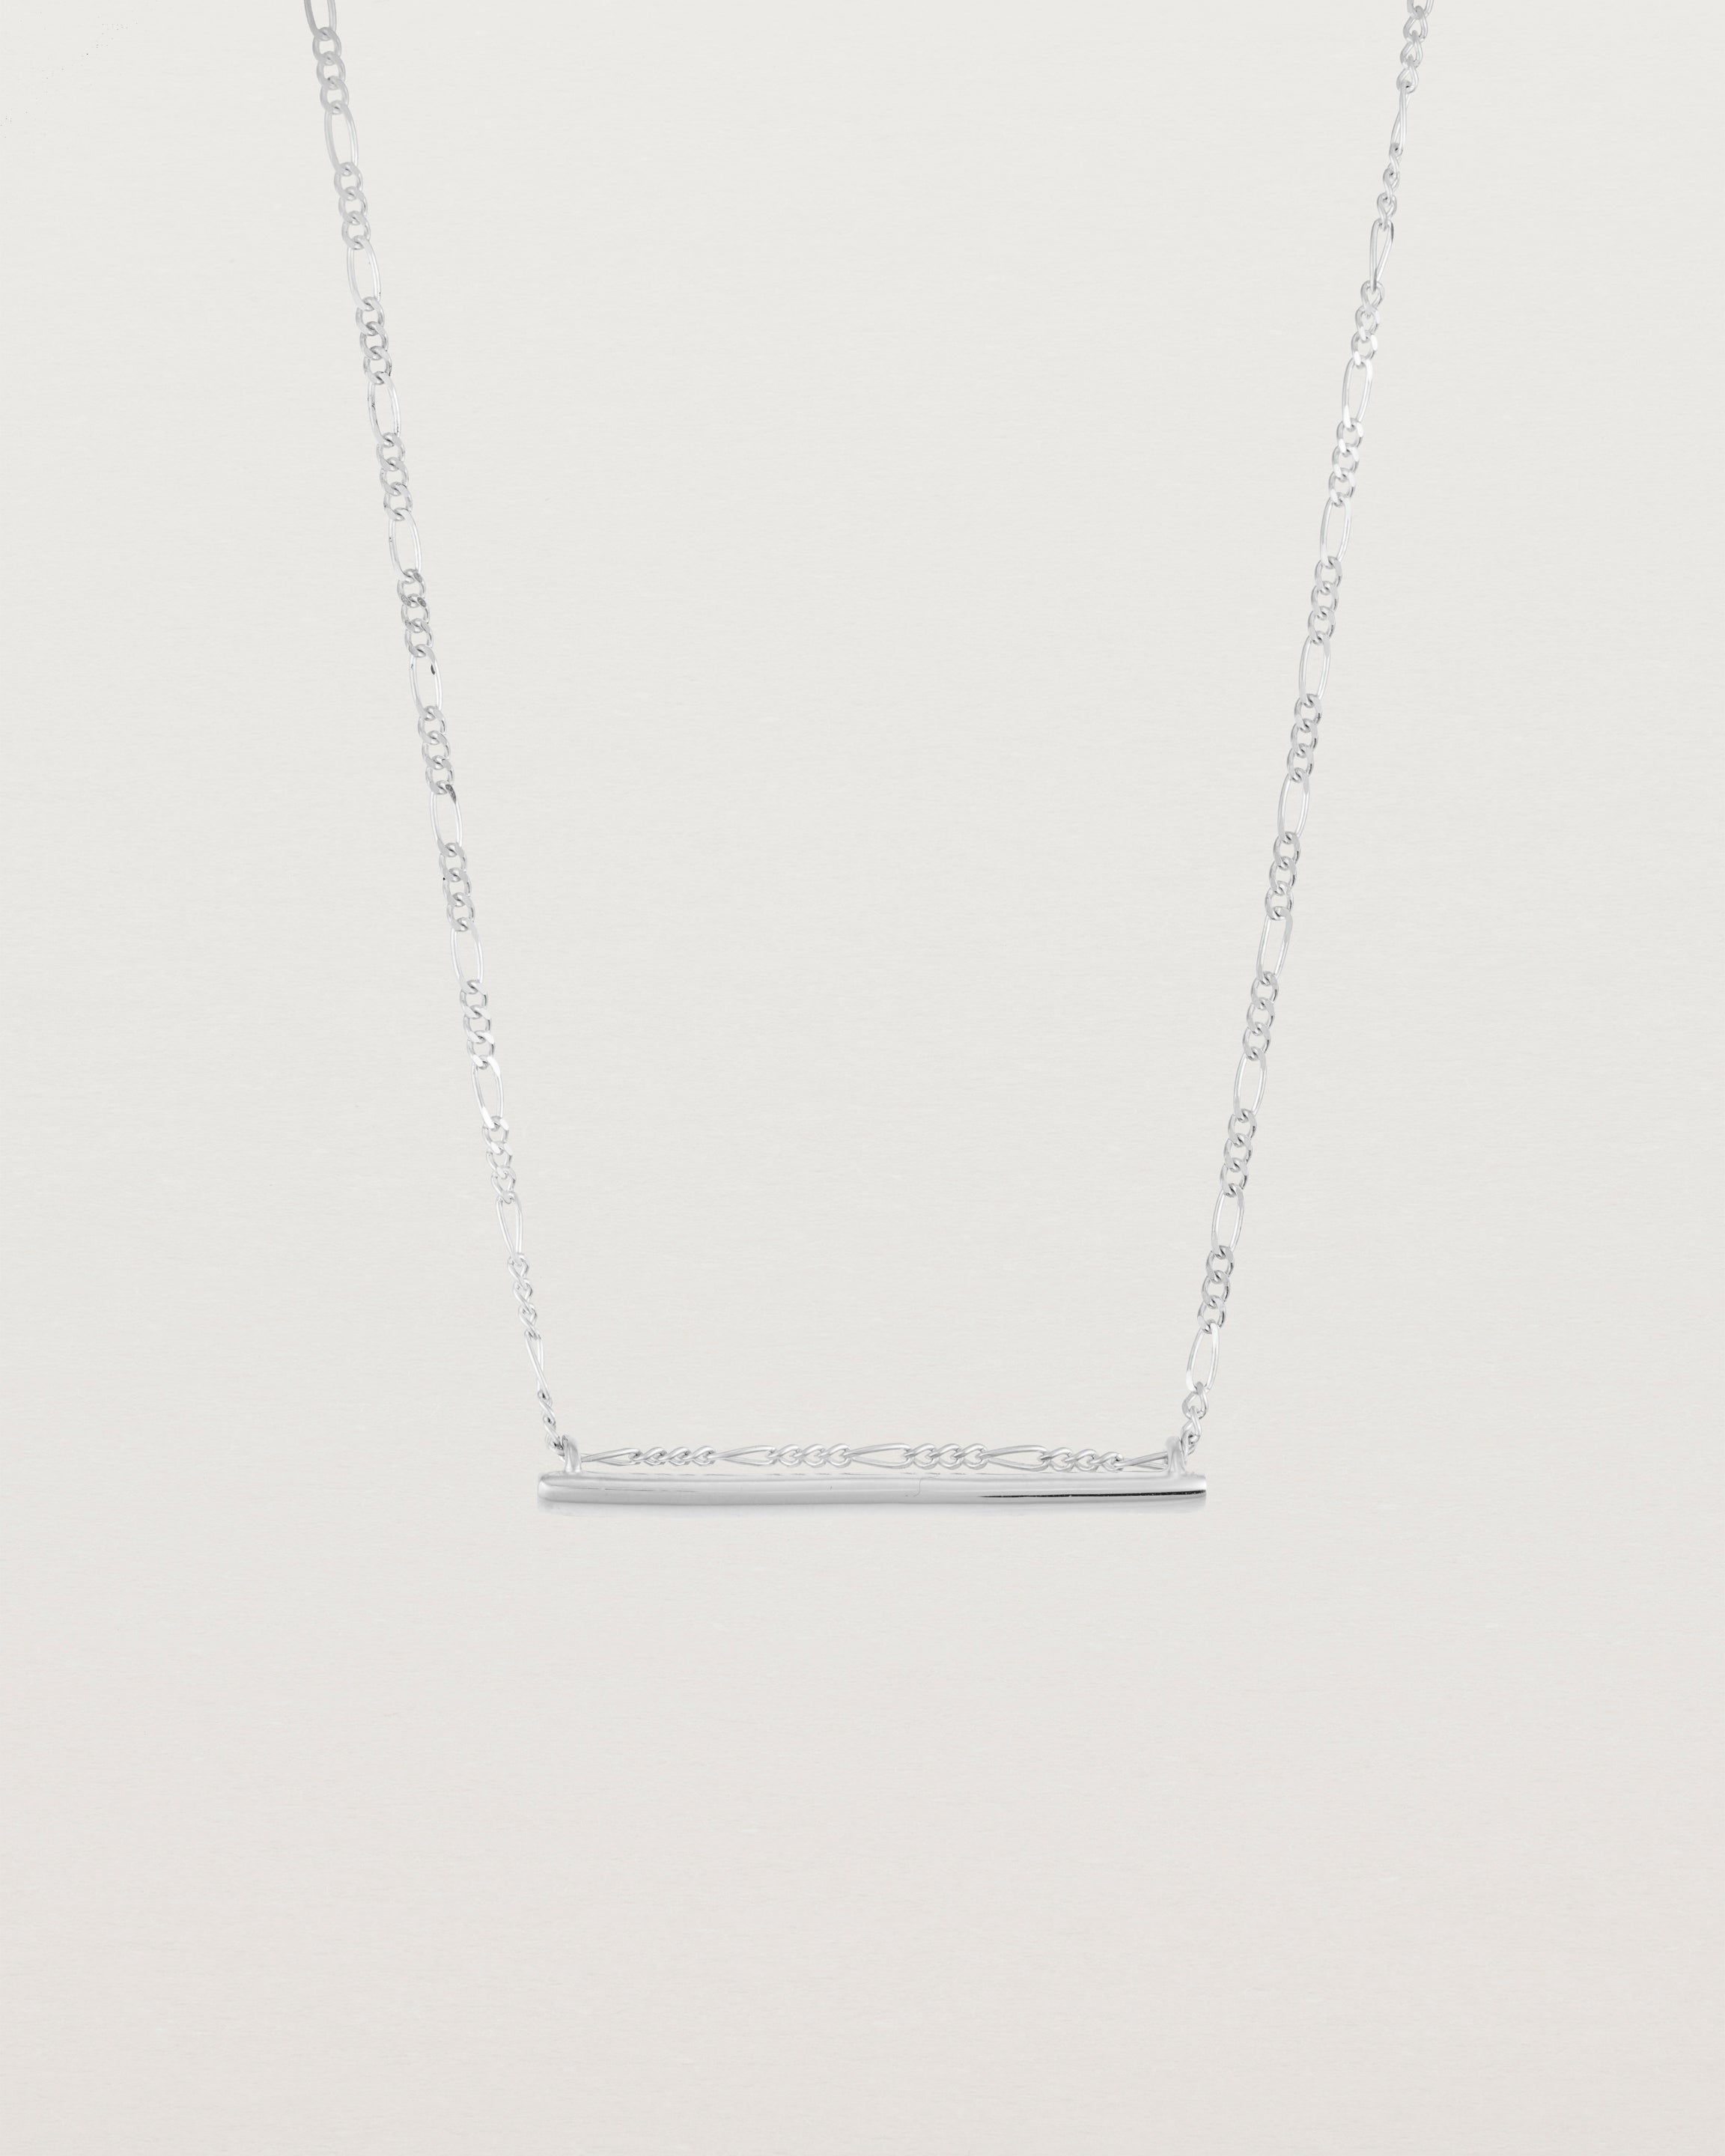 Ellipse necklace with a silver bar hanging from a chain in sterling silver